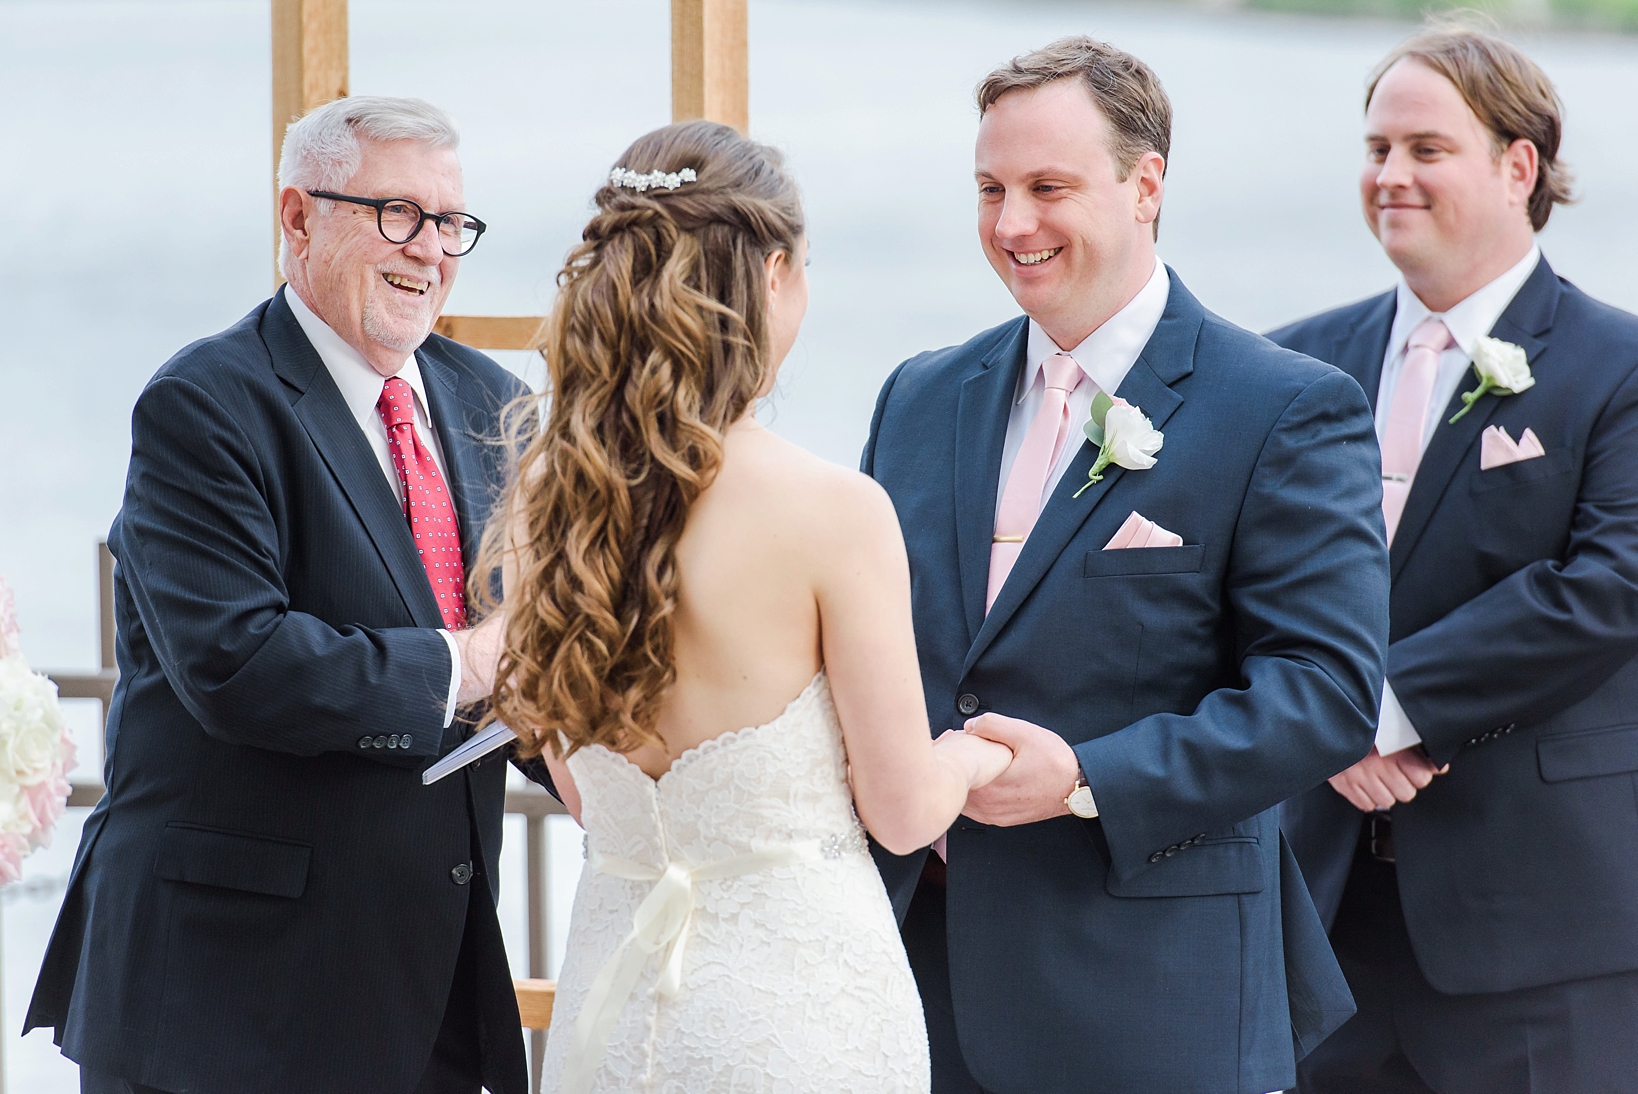 Groom smiling at his Bride during their wedding ceremony by Sarah & Ben Photography